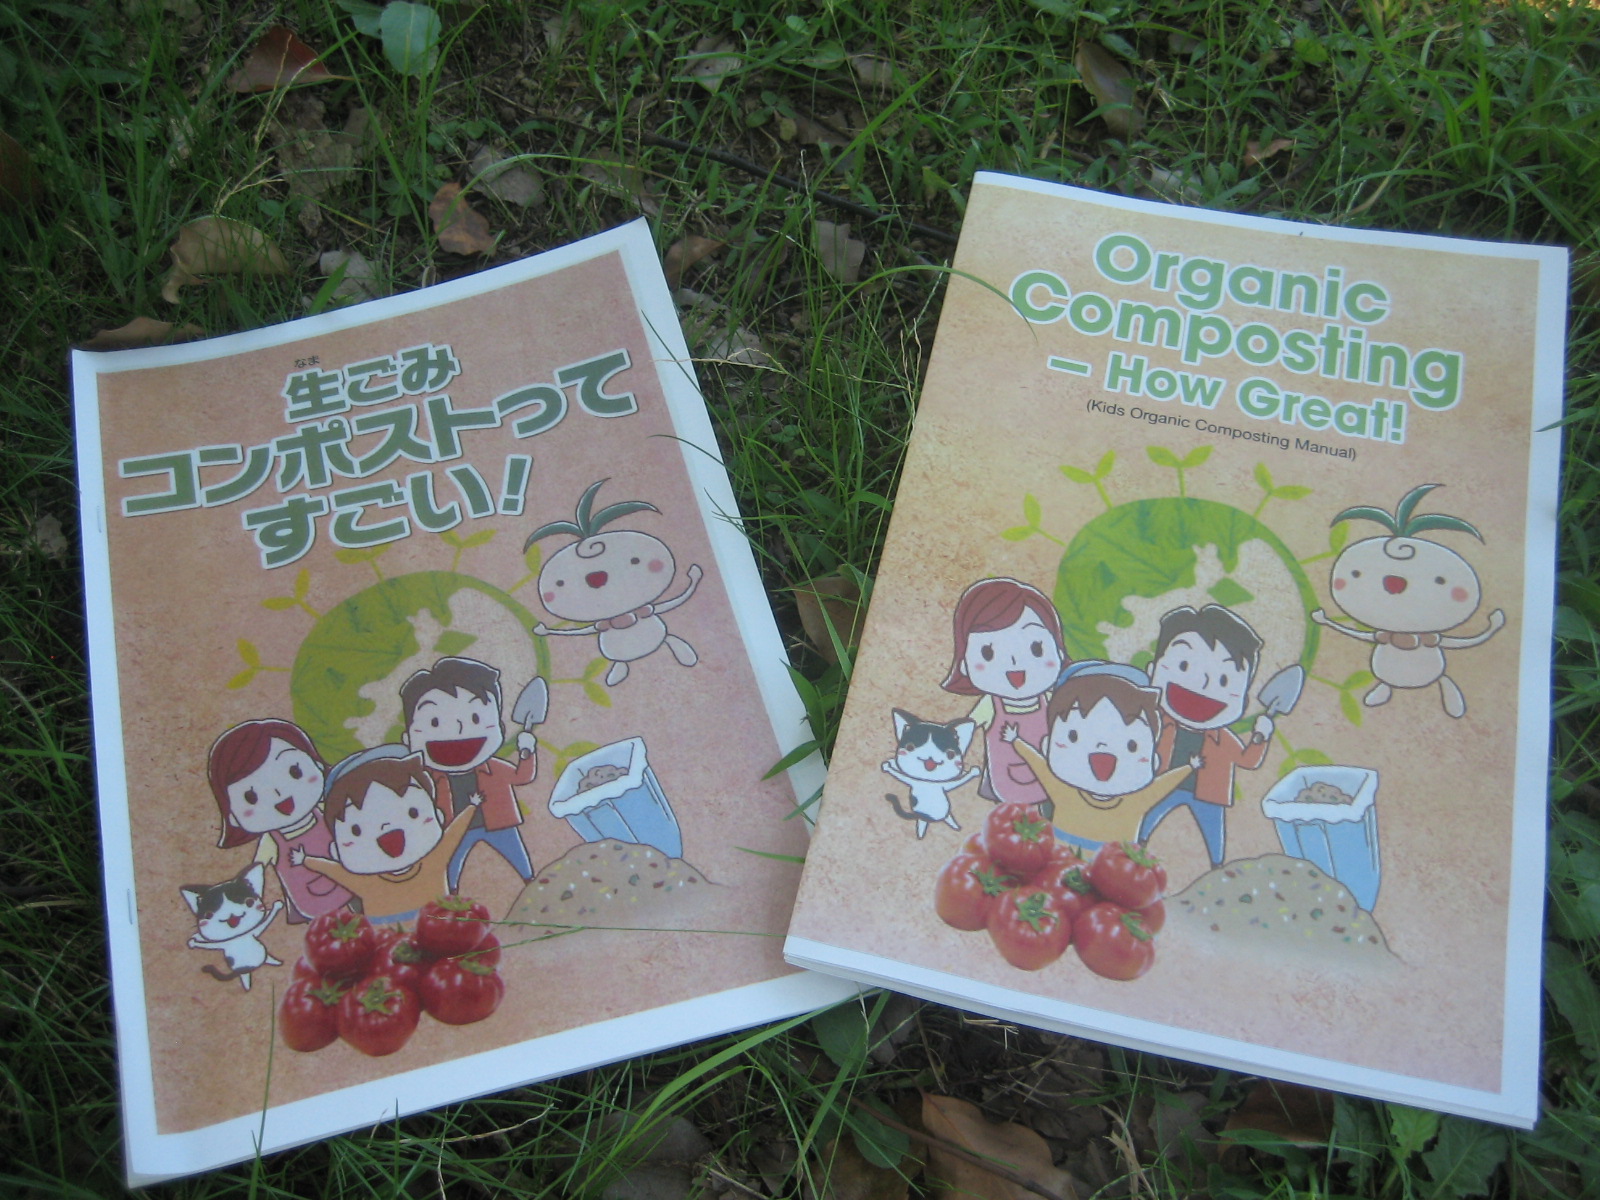 Organic Composting - How Great! (Organic Composting Manual for Kids)